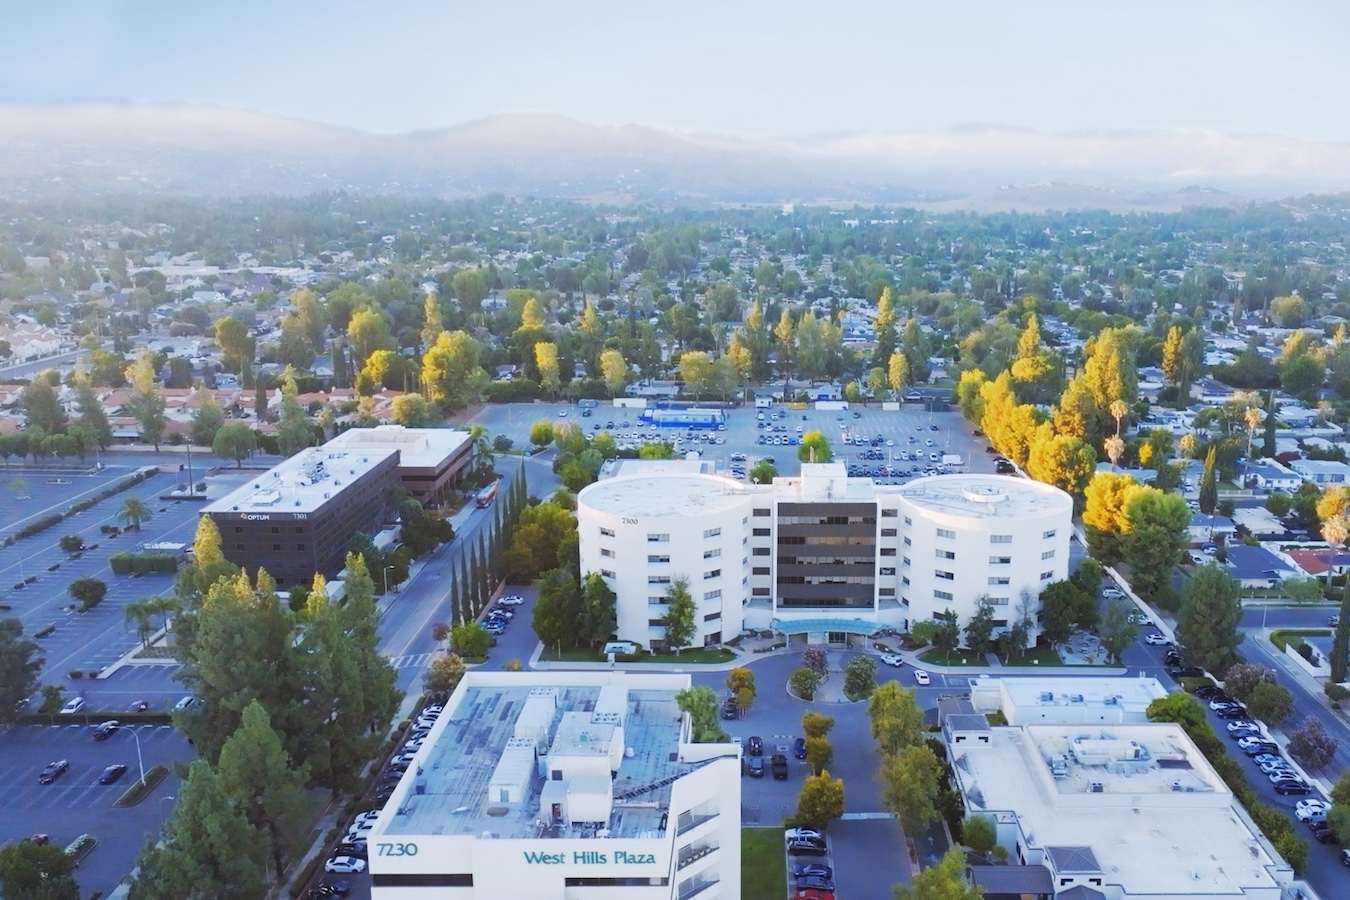 Aerial view of 14-acre hospital site in the San Fernando Valley